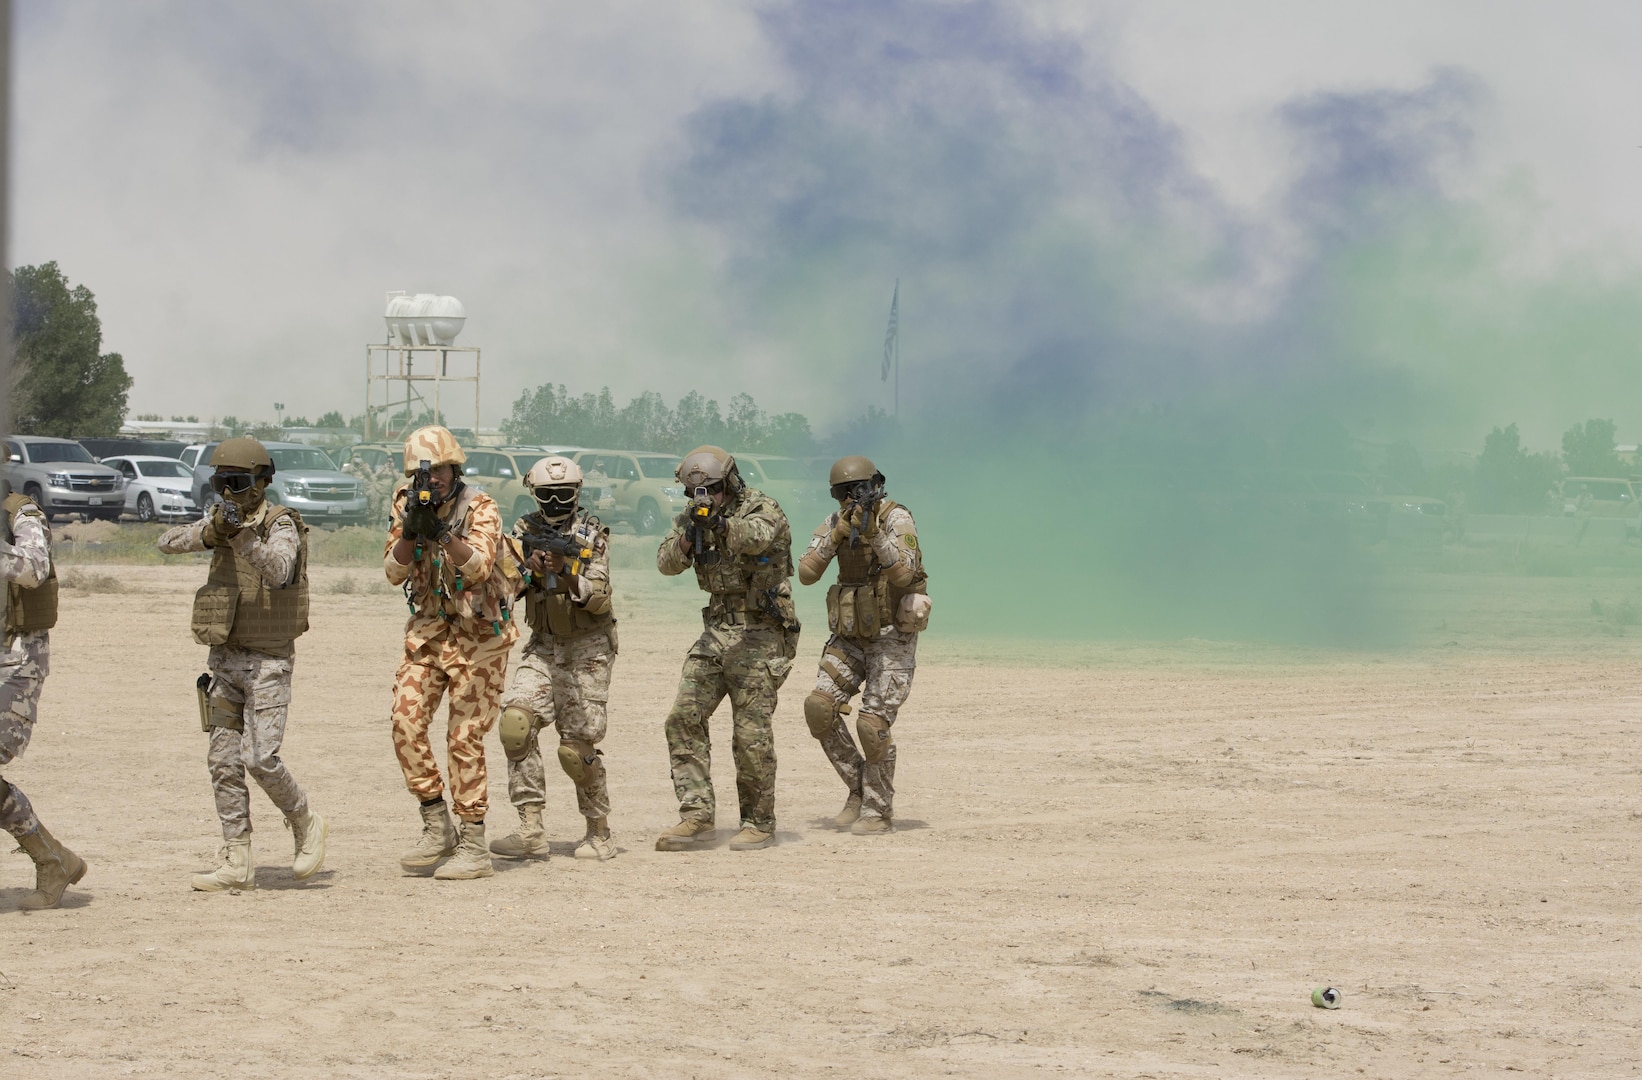 Kuwait- A large crowd of foreign and U.S. dignitaries’ view teams comprised of their combined special forces emerge from a purple and green smoke screen during an explosive training mission demonstrating the successful interoperability of Qatar, Kuwait, Saudi Arabia and the United States as partner nations and part of Operation Eagle Resolve involving both land and air elements, April 2. 
(Photo by Army Sgt. 1st Class Suzanne Ringle/Released)